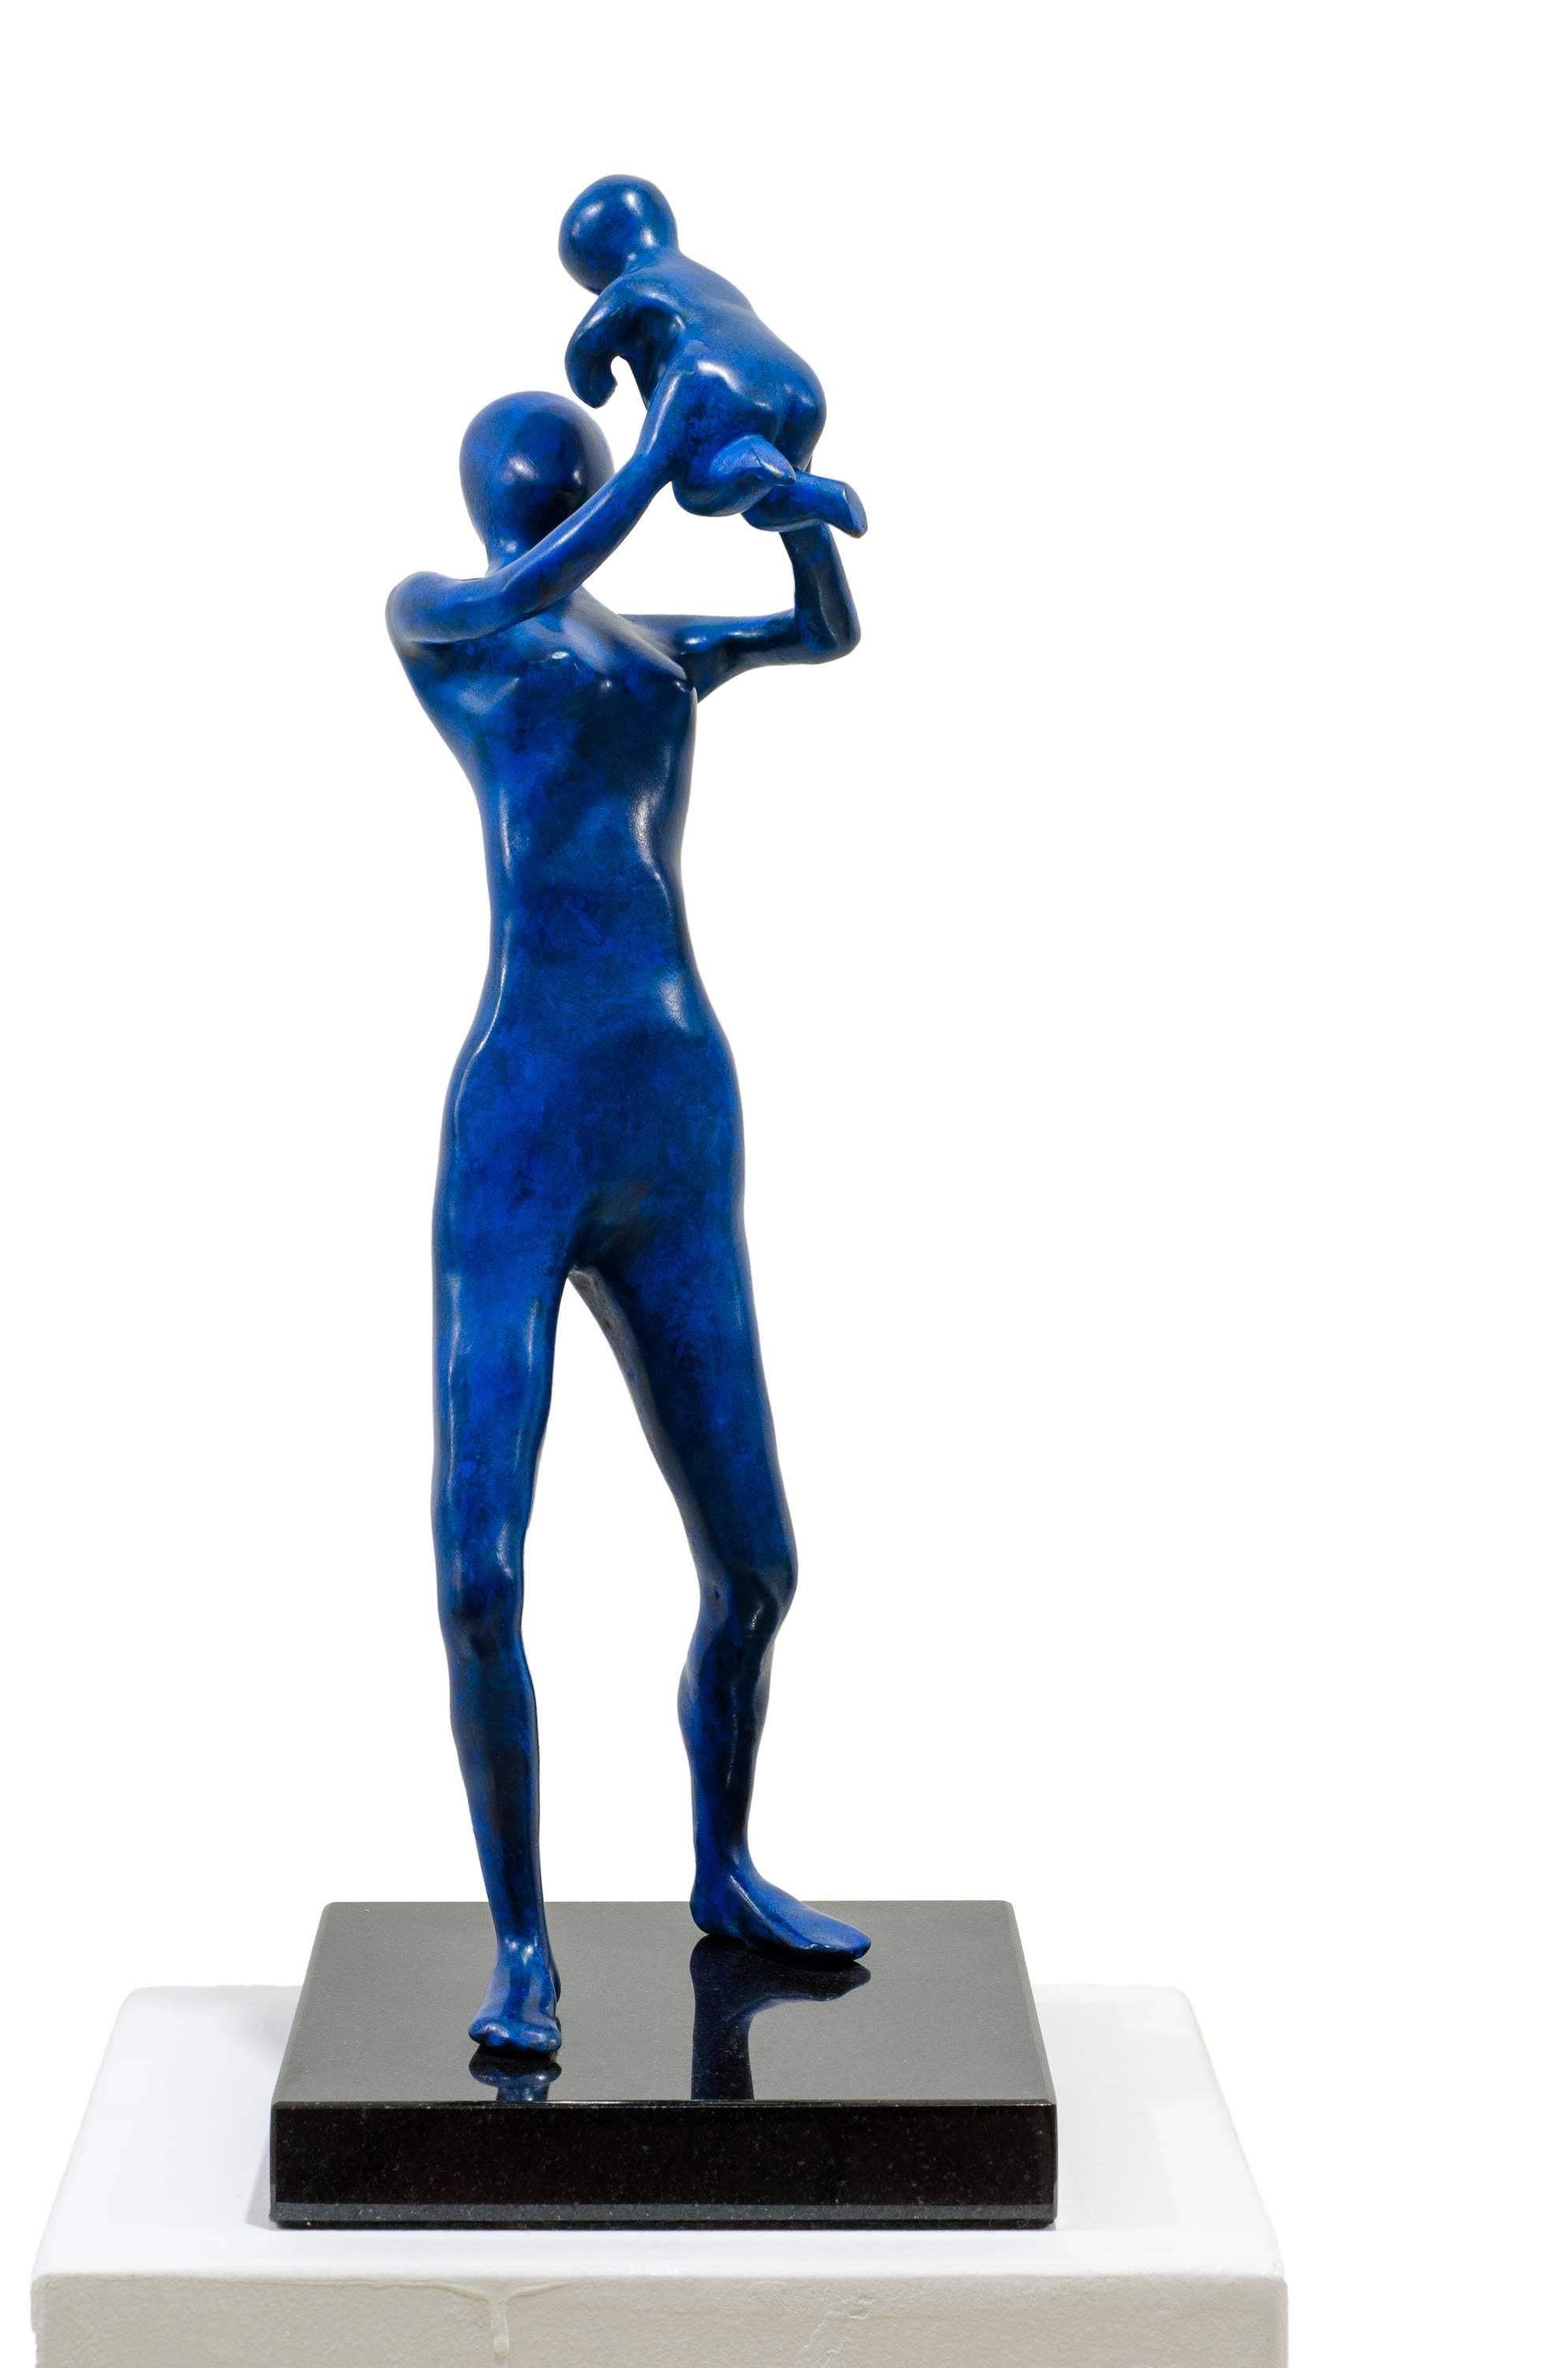 Beatriz Gerenstein Abstract Sculpture - Mother in Blue. The mother proudly holds up her baby, enjoying the laughter